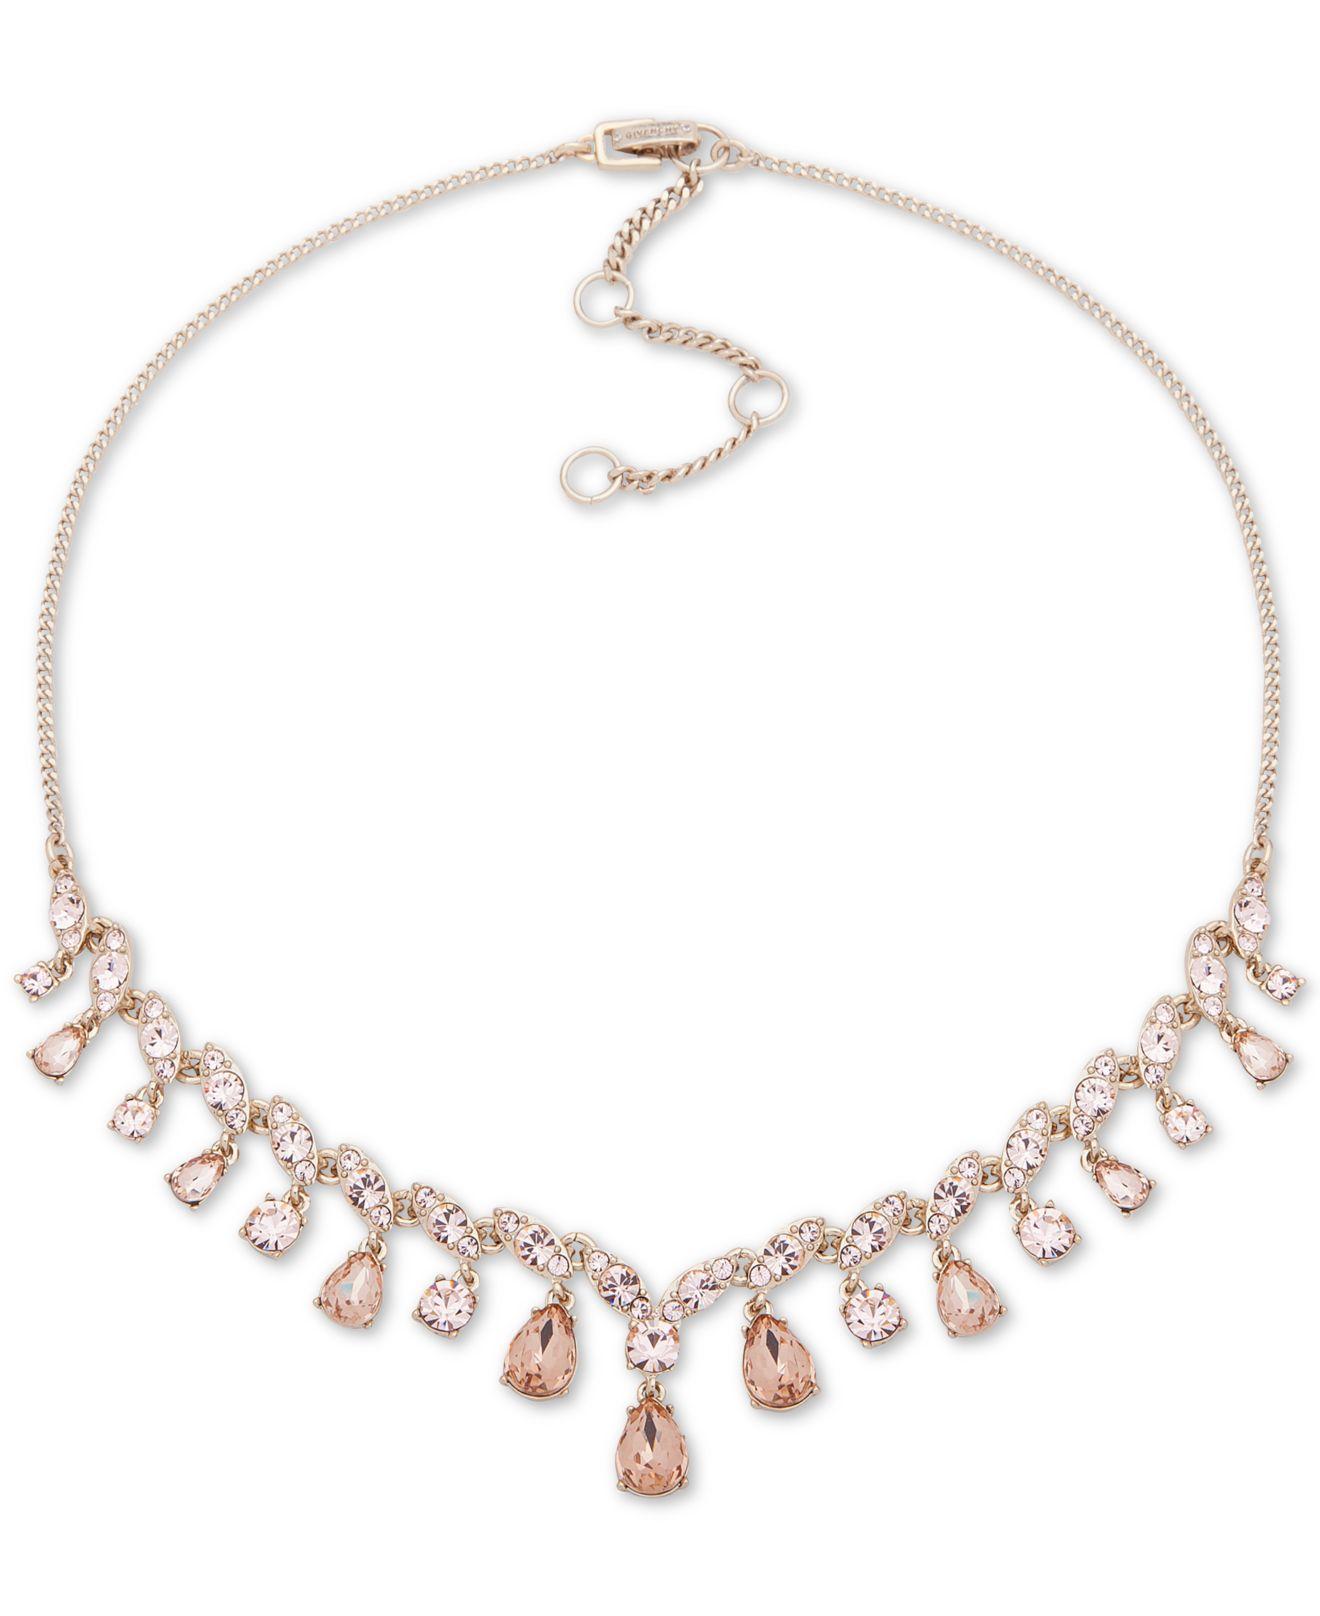 Lyst - Givenchy Silver-tone Crystal Statement Necklace, 16 ...